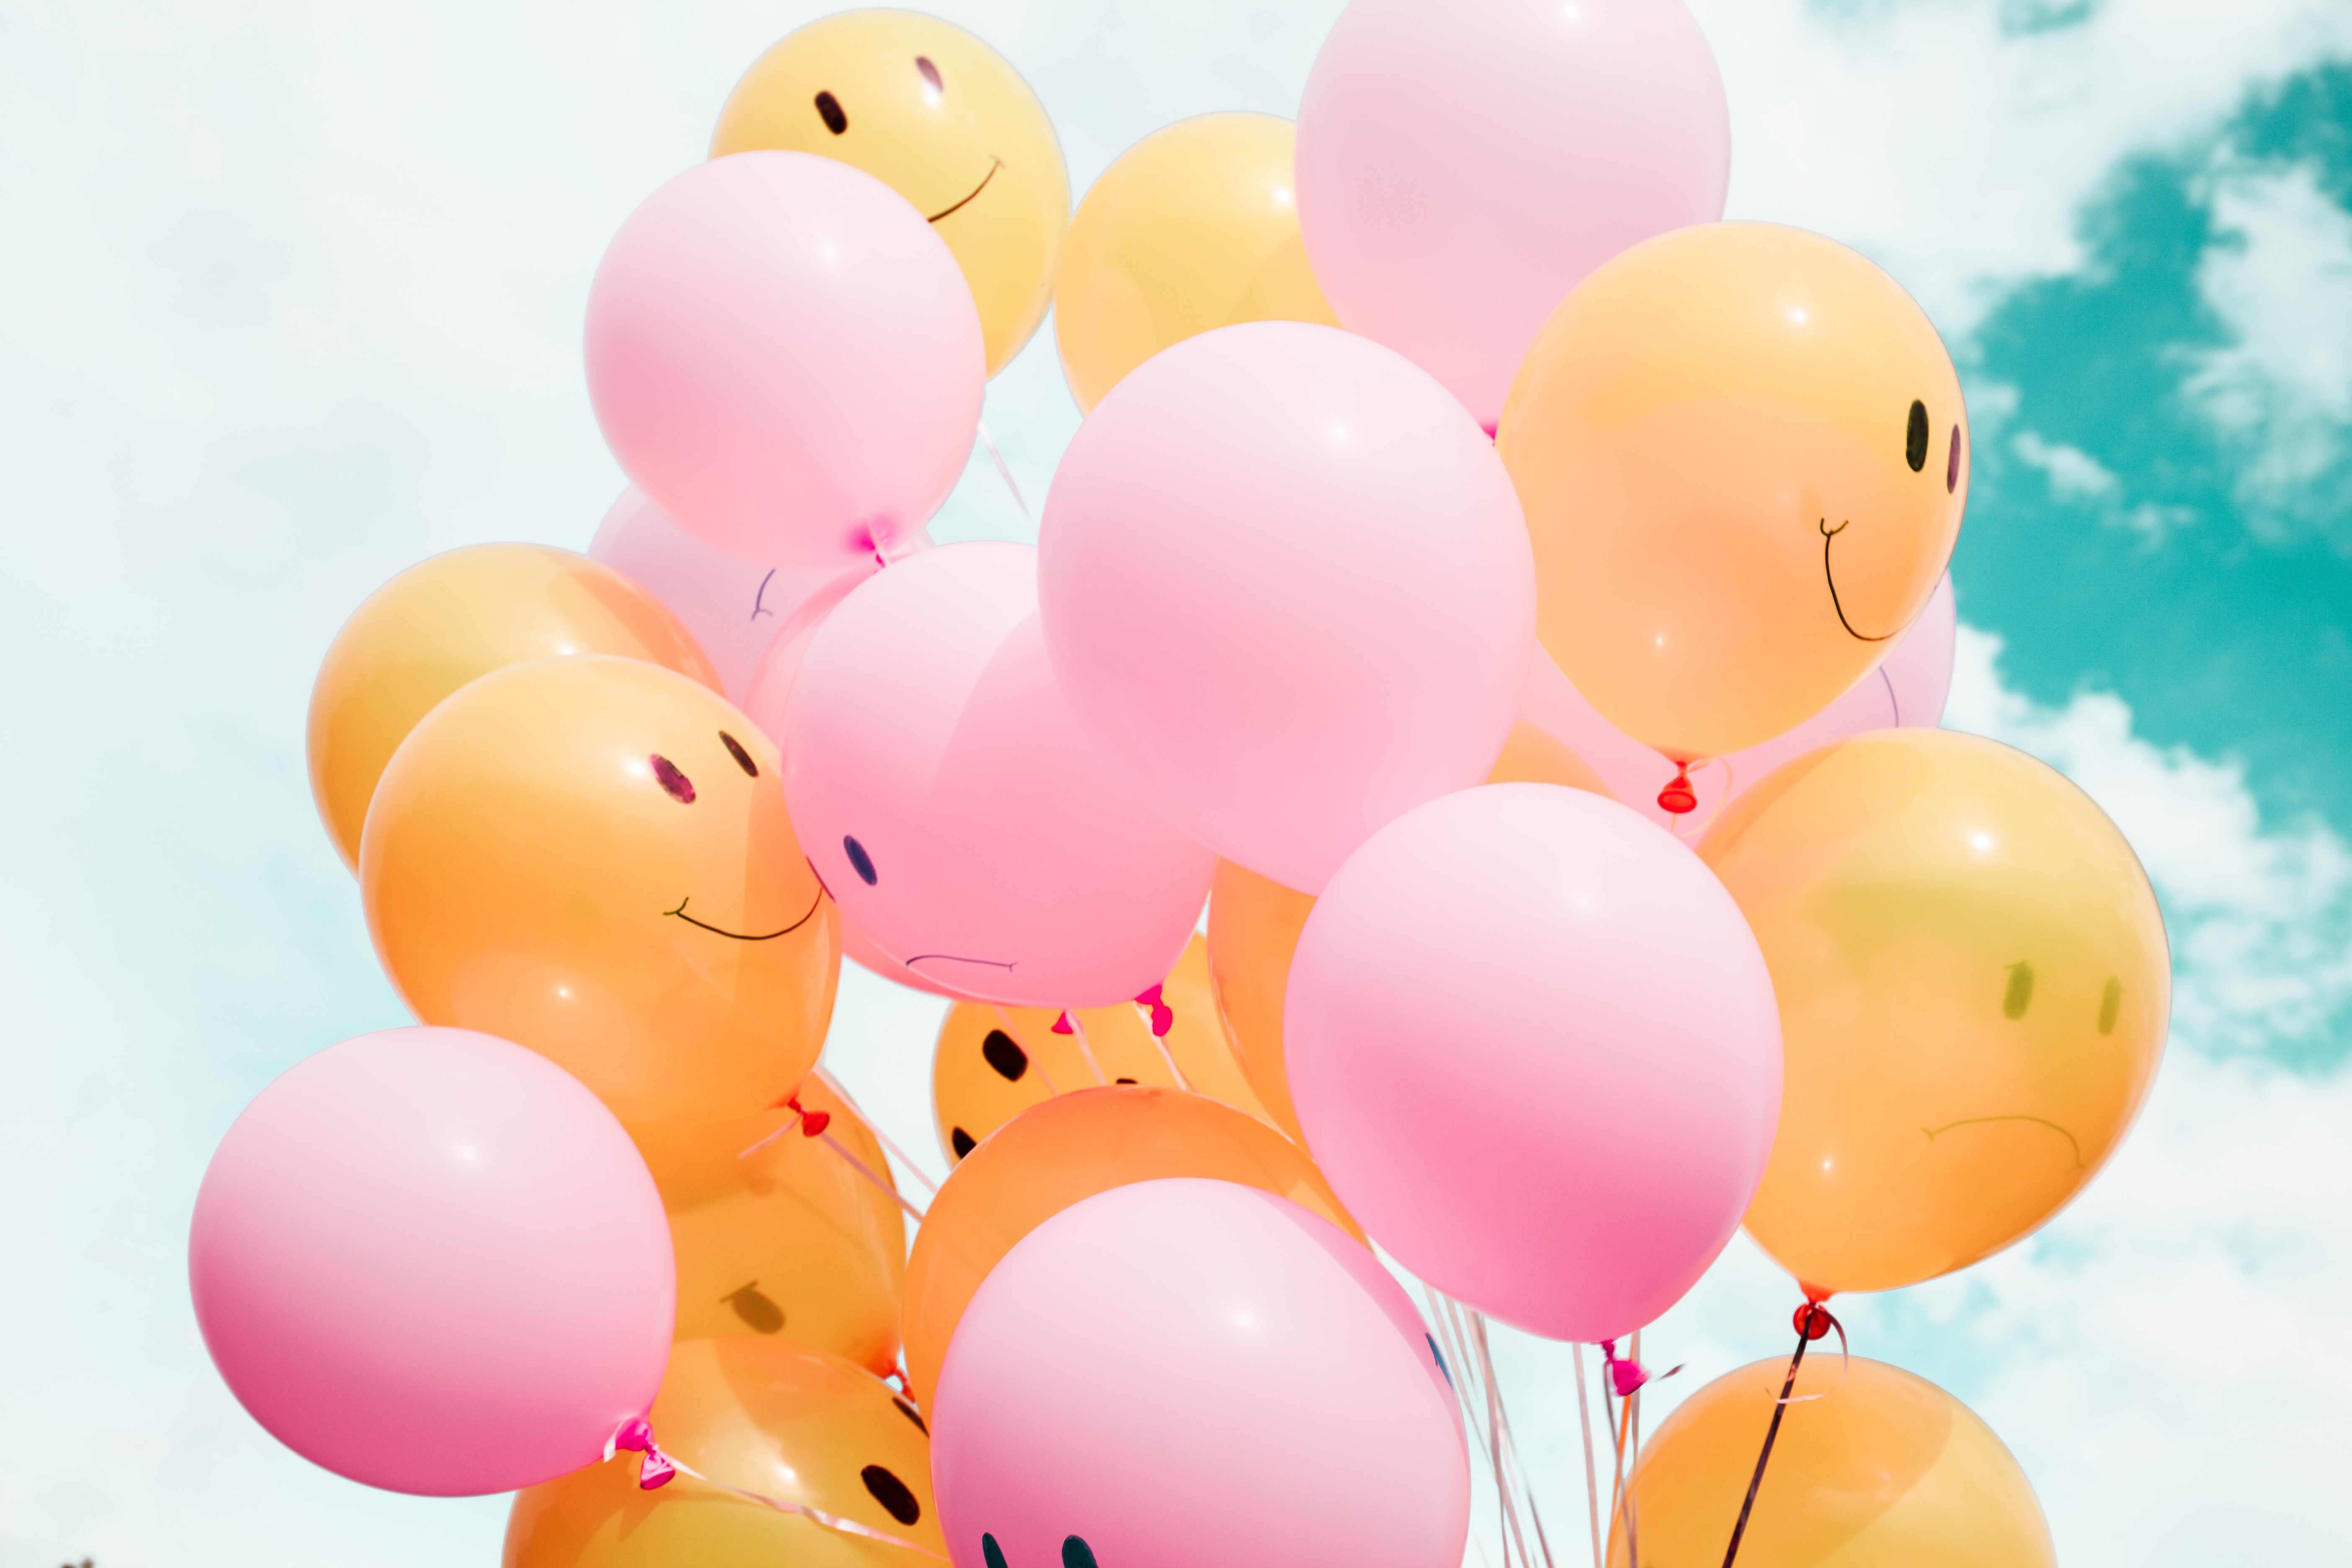 Smiling balloons with blue sky